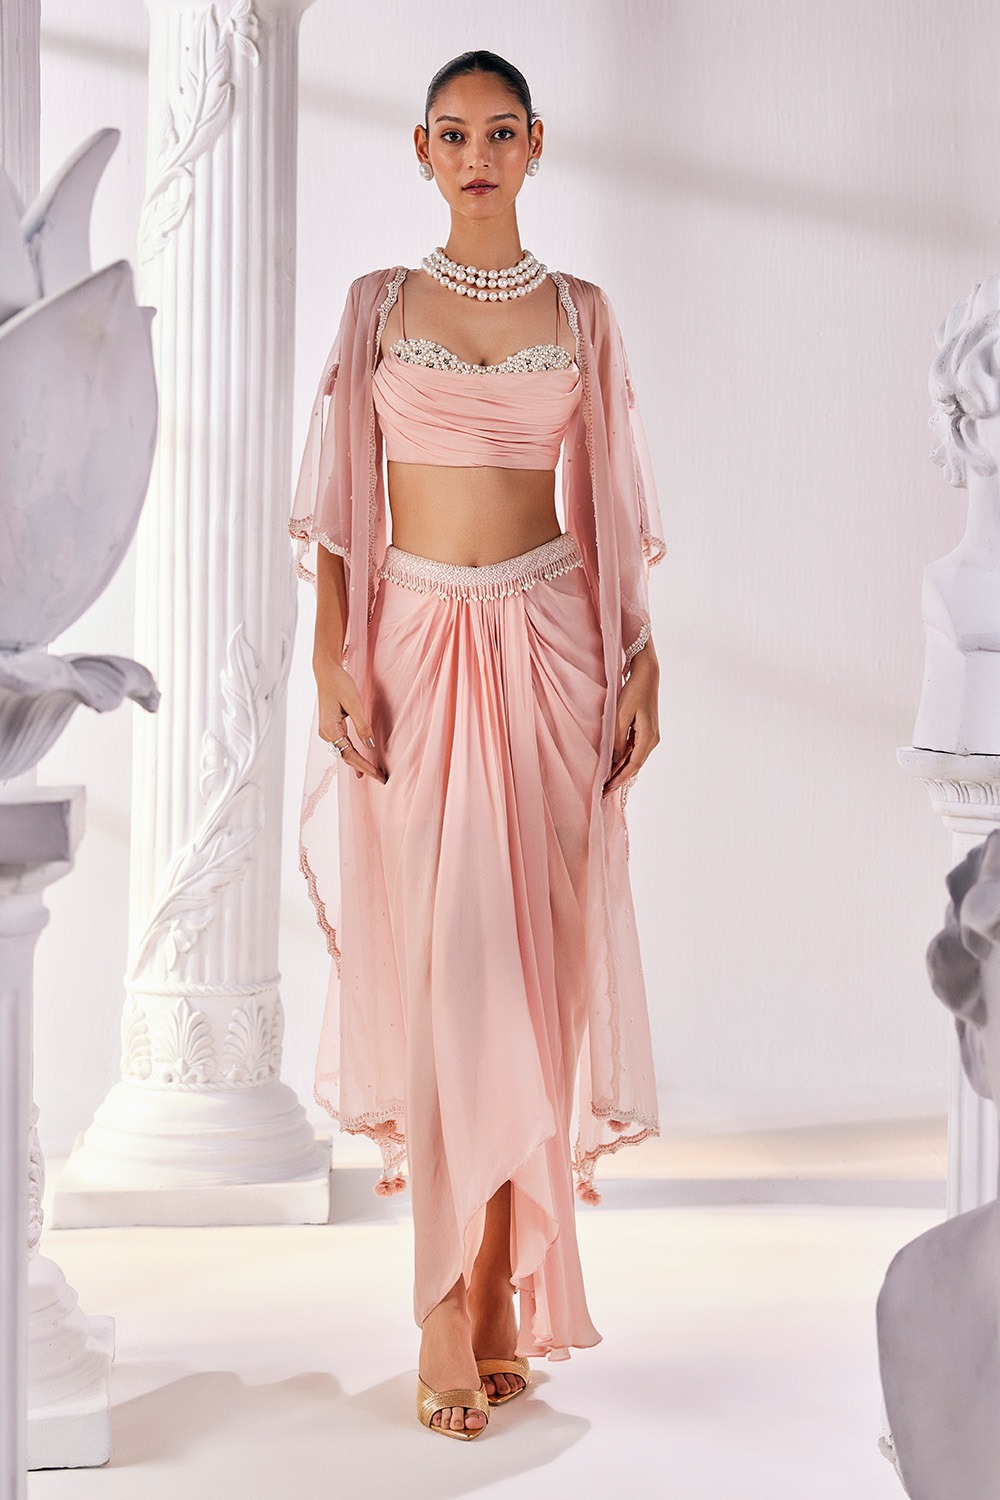 Peach Draped Skirt With a Belt And a Pearl Detailed Blouse With A Soft Organza Cape